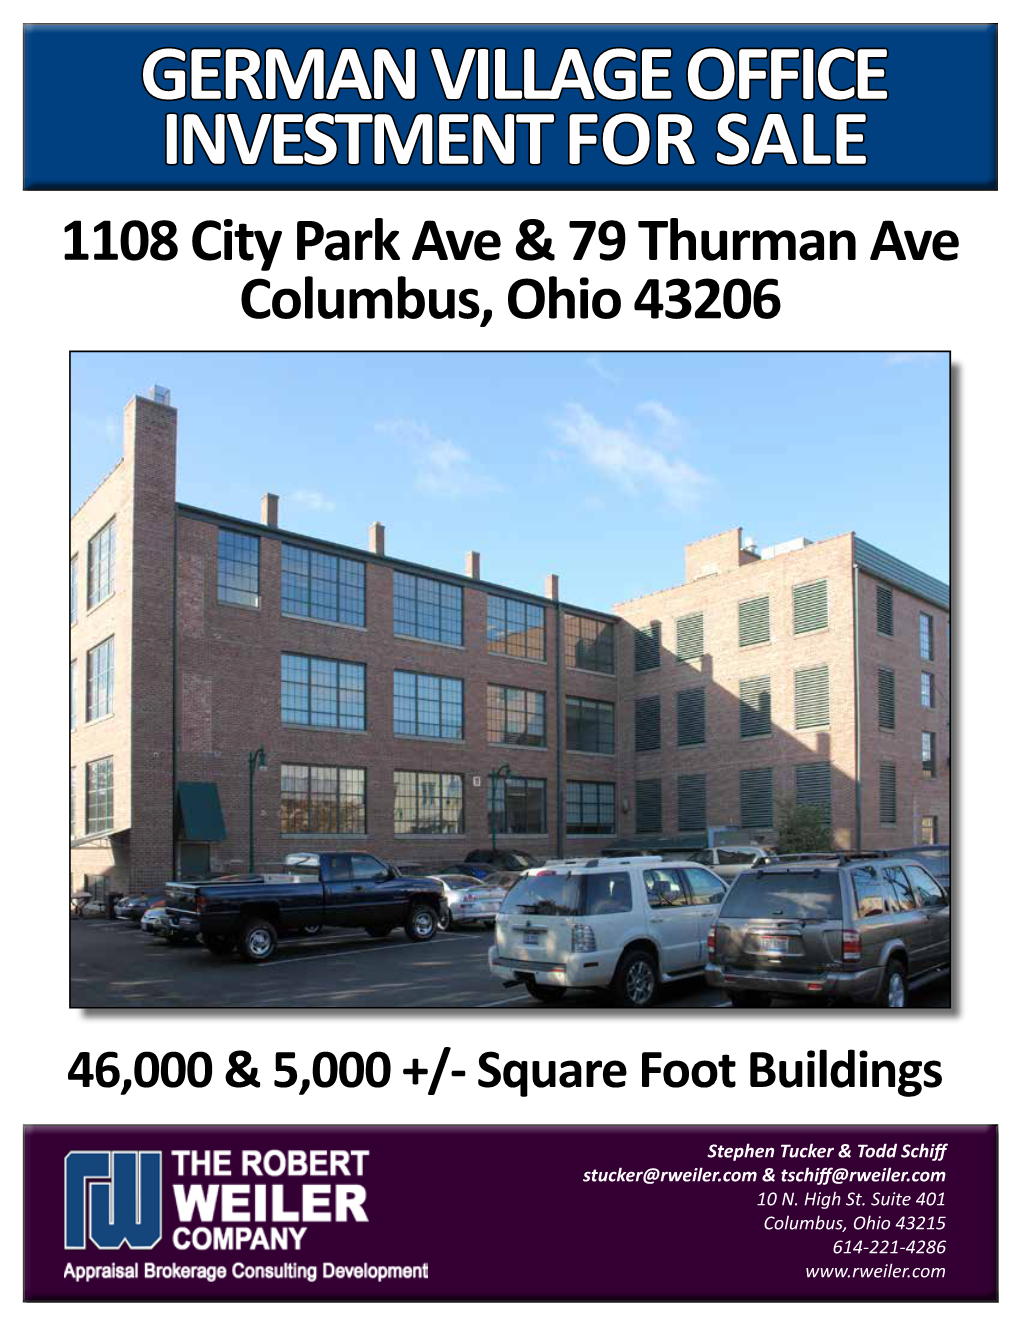 GERMAN VILLAGE OFFICE INVESTMENT for SALE 1108 City Park Ave & 79 Thurman Ave Columbus, Ohio 43206